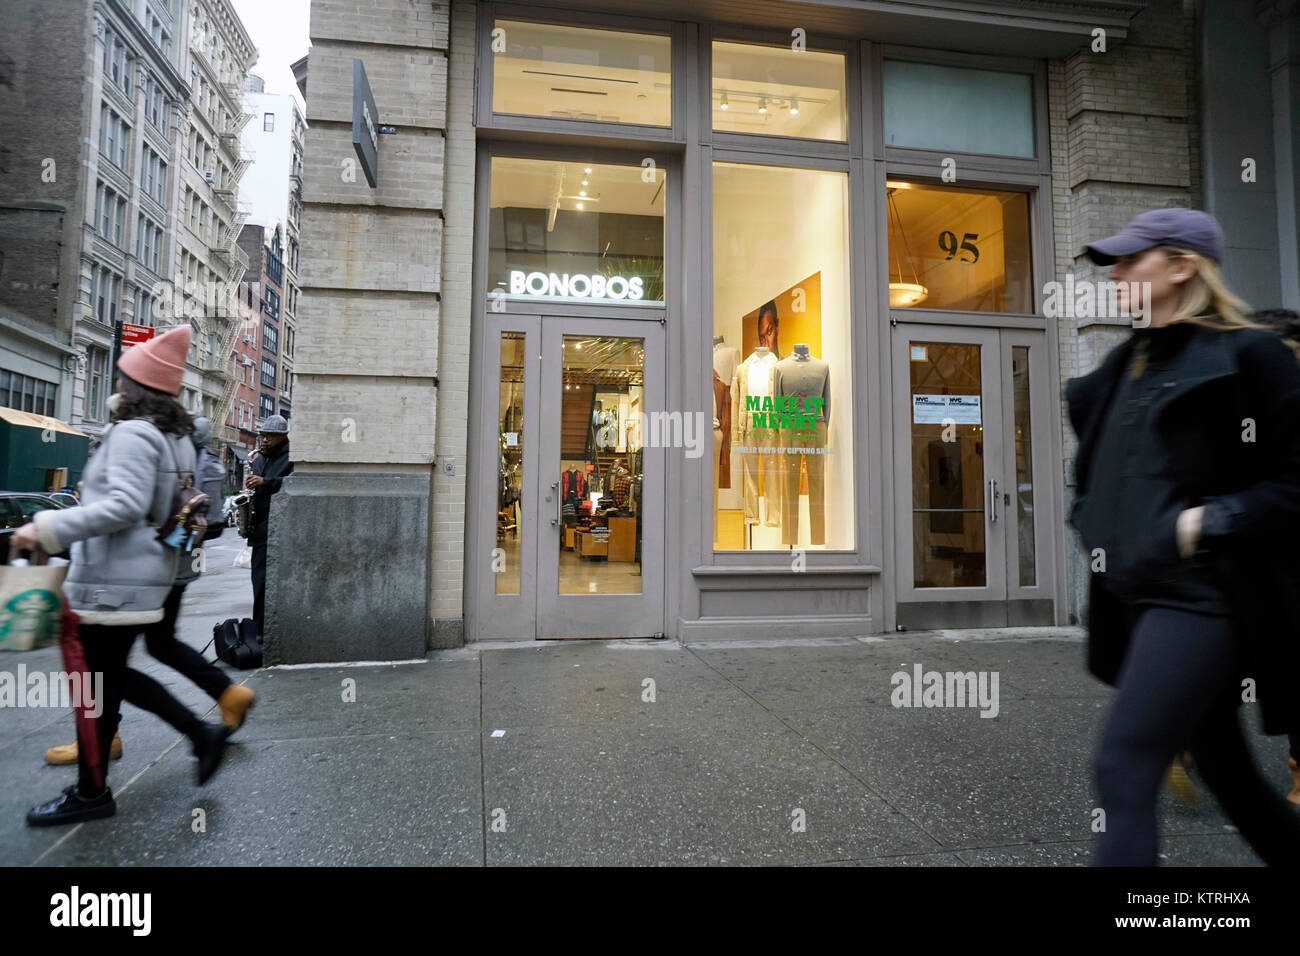 A Bonobos brick and mortar store in New York on Saturday, December 23, 2017. Wal-Mart Stores Inc.recently purchased the e-tailer. Wal-Mart has already bought Jet.com, Moosejaw and ModCloth to boost its web presence.  (© Richard B. Levine) Stock Photo